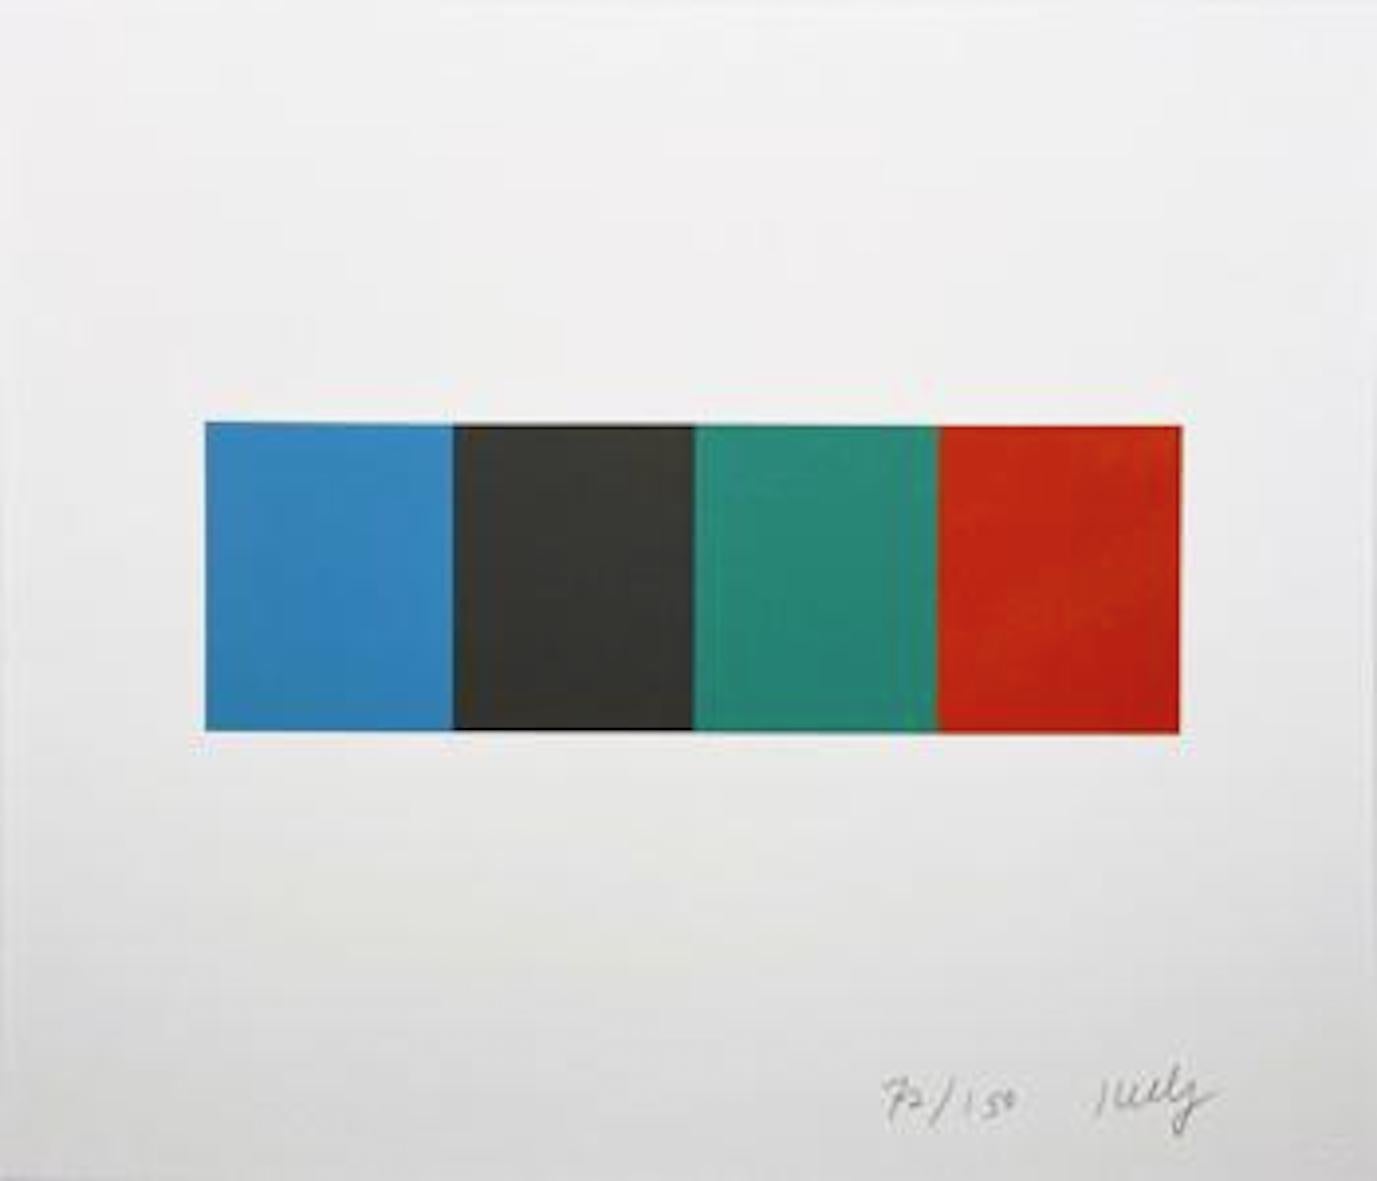 "Blue Gray Green Red" from the Artist for Obama Portfolio; 2008; Lithograph - Print by Ellsworth Kelly